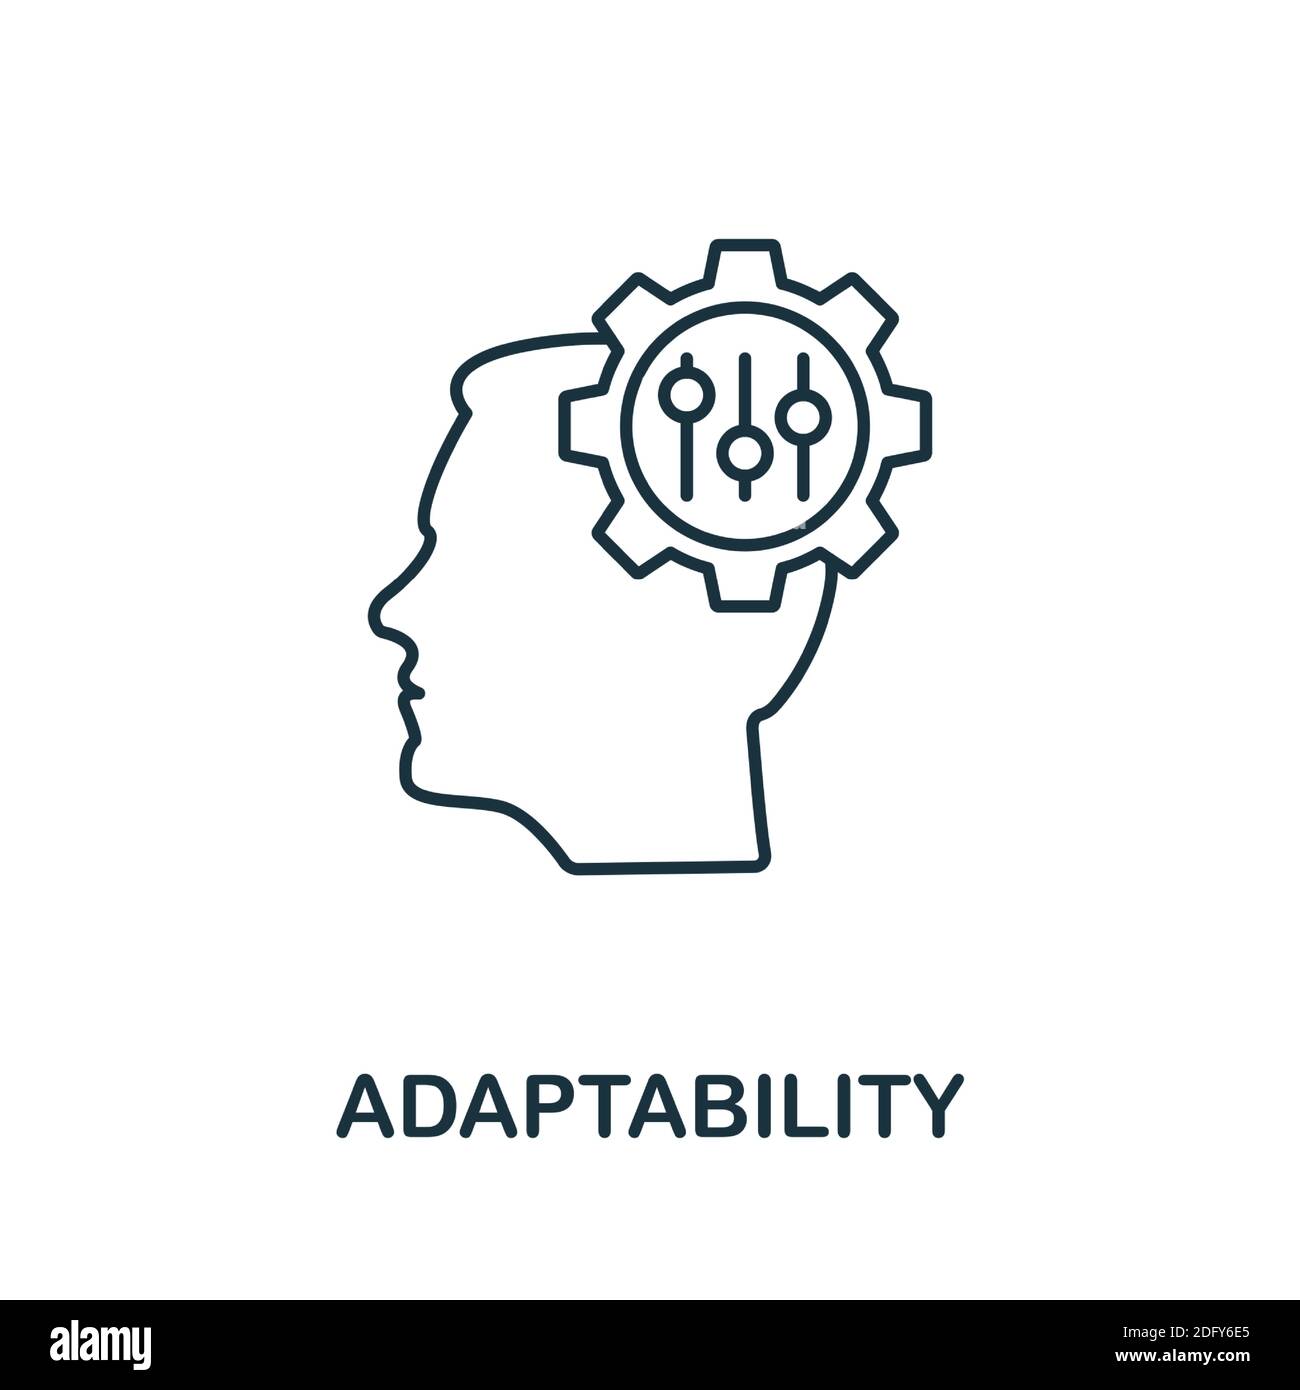 Adaptability icon. Line style element from life skills collection. Thin Adaptability icon for templates, infographics and more Stock Vector